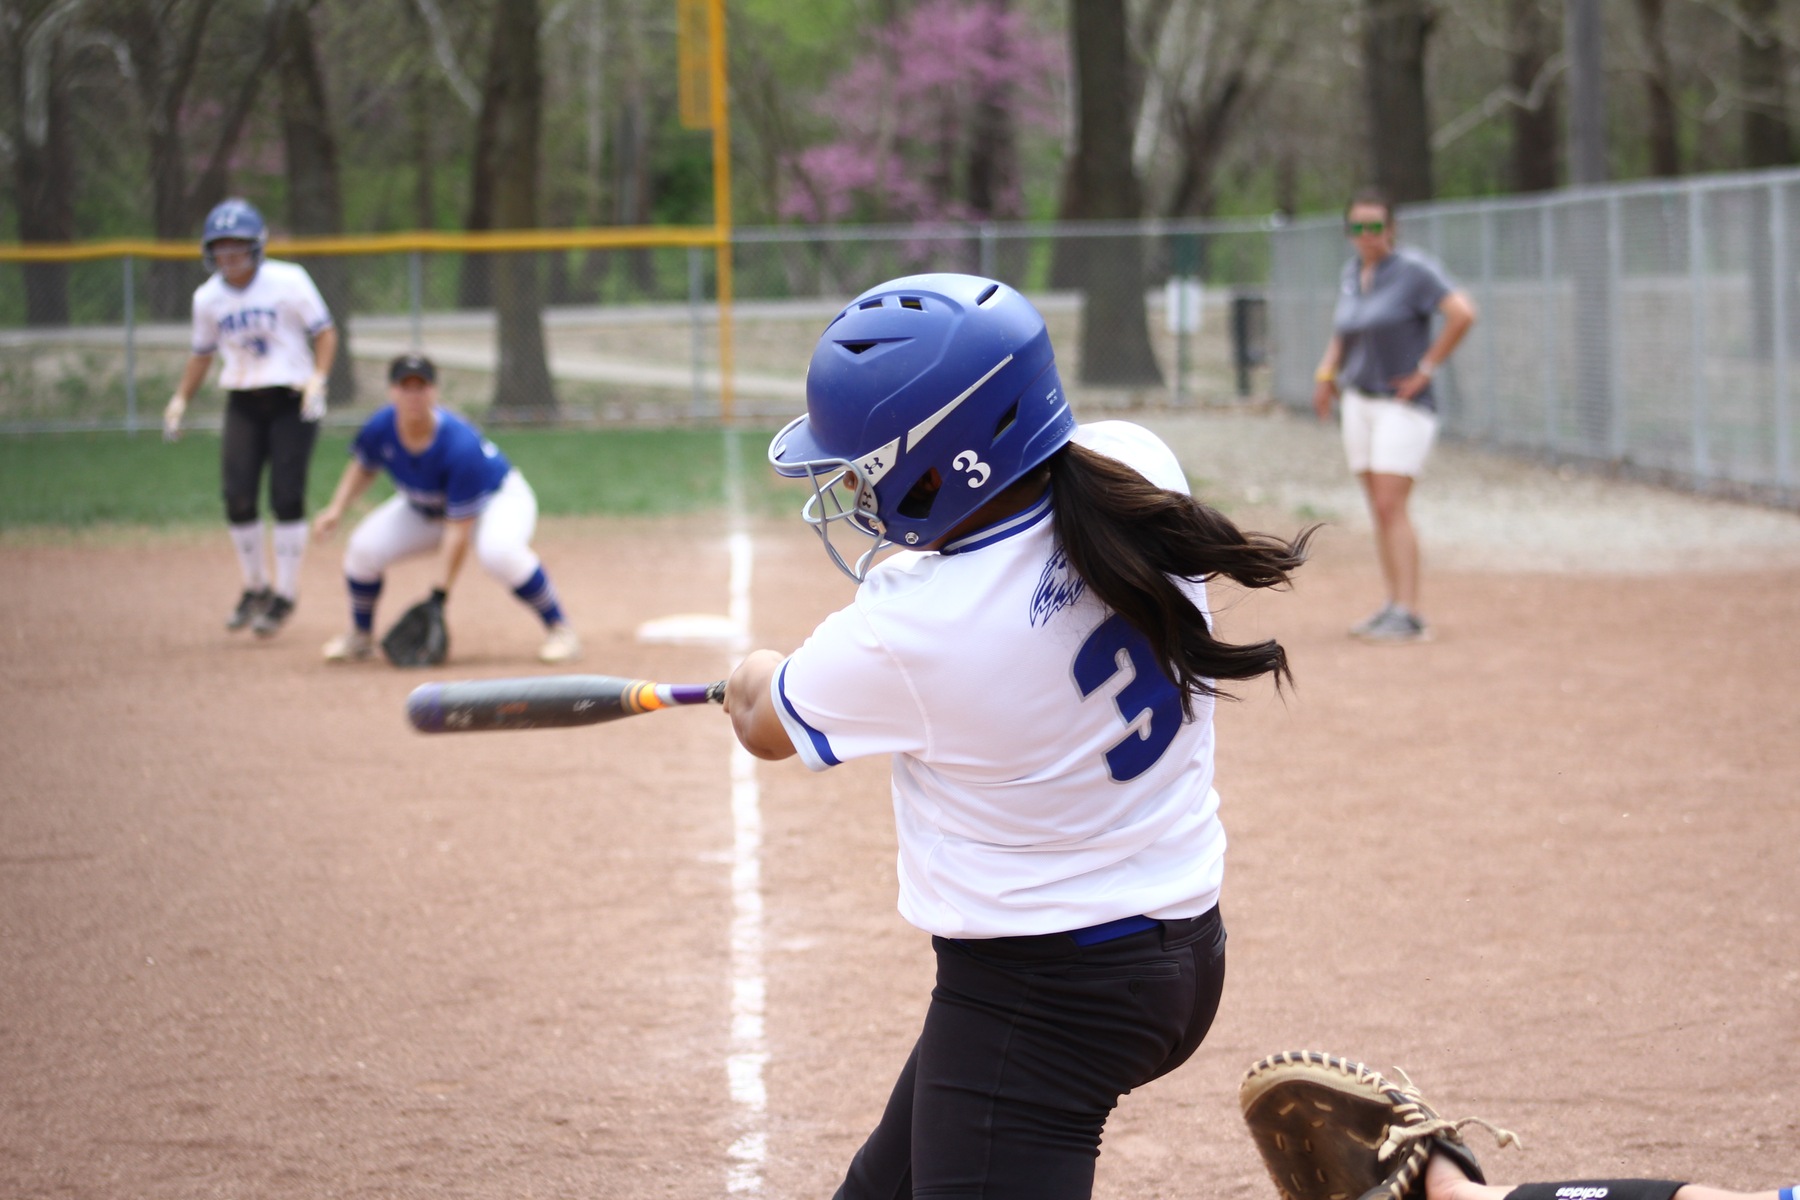 PCC softball ends season 4-21 in Conference